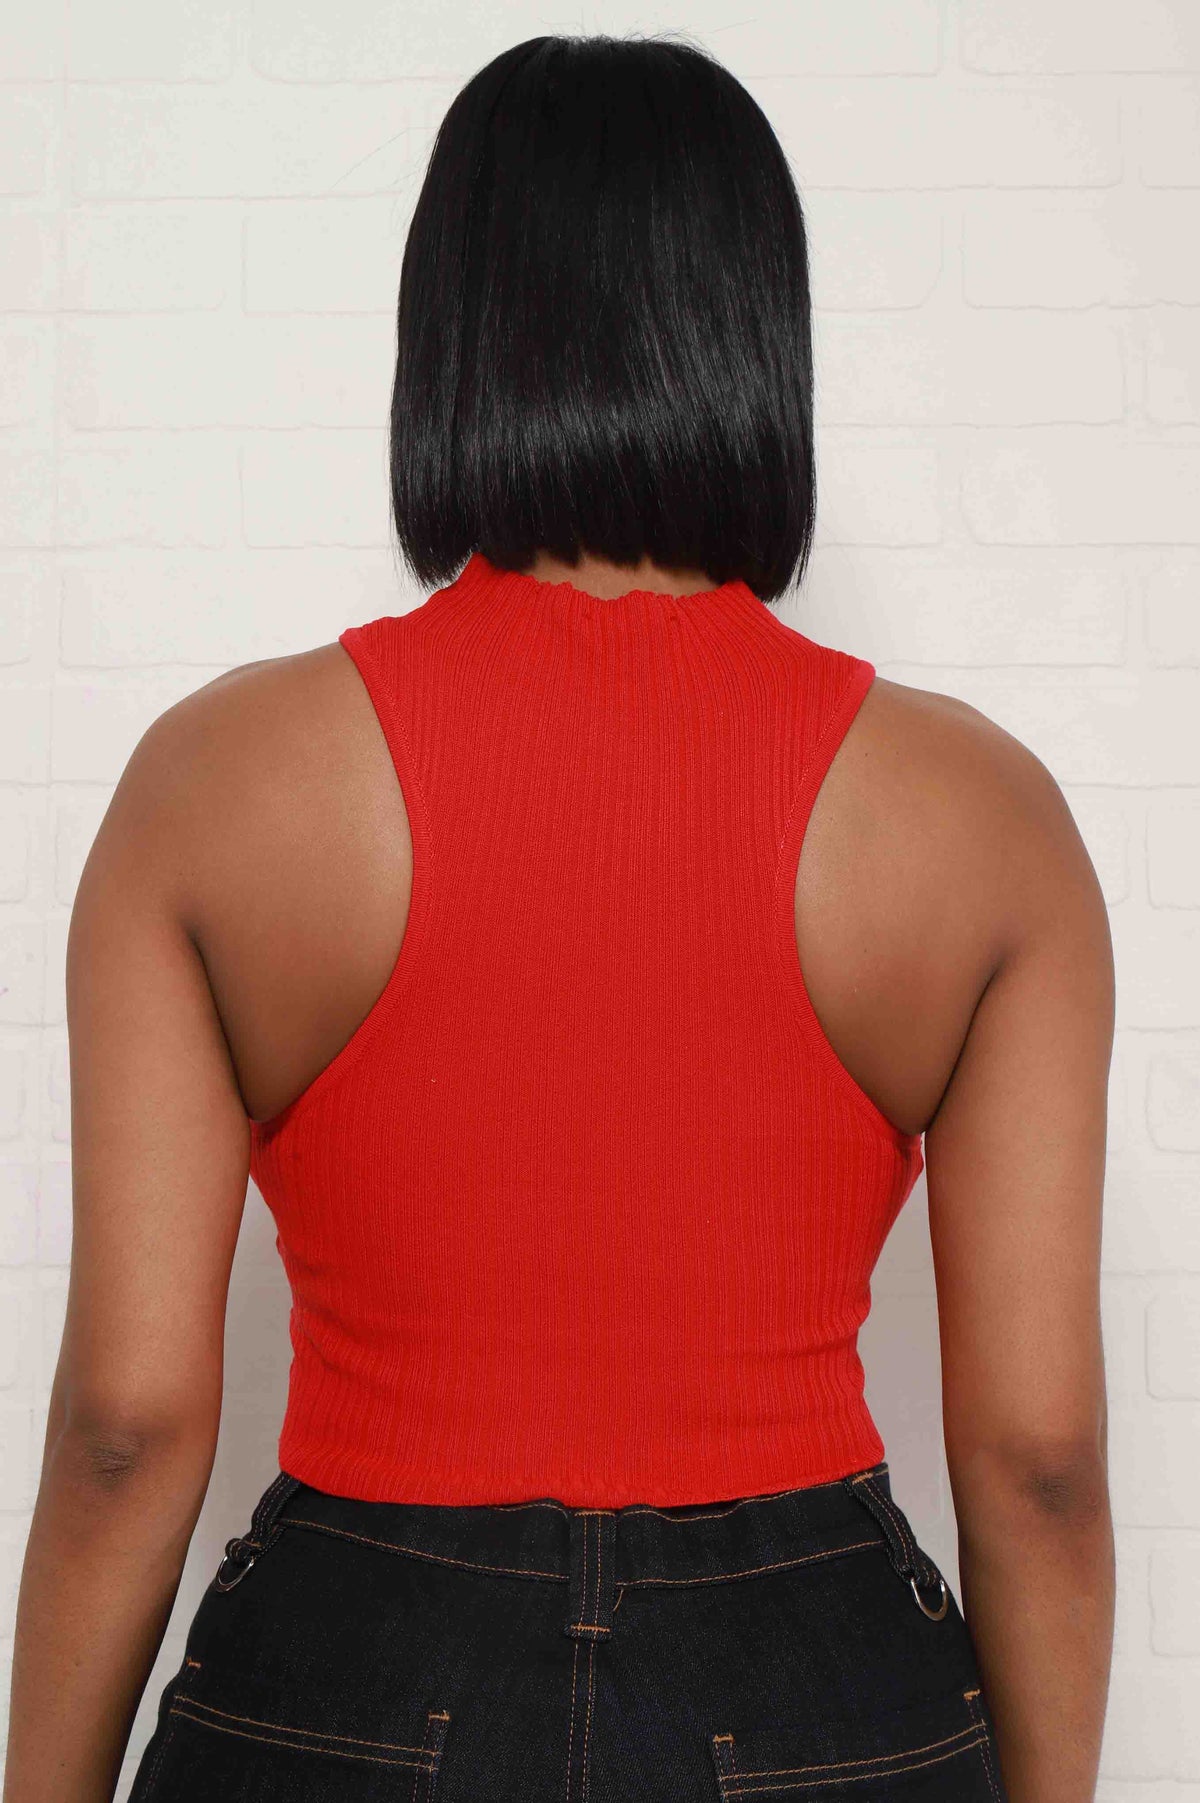 
              Off The Hook Sleeveless Knit Crop Top - Red - Swank A Posh
            